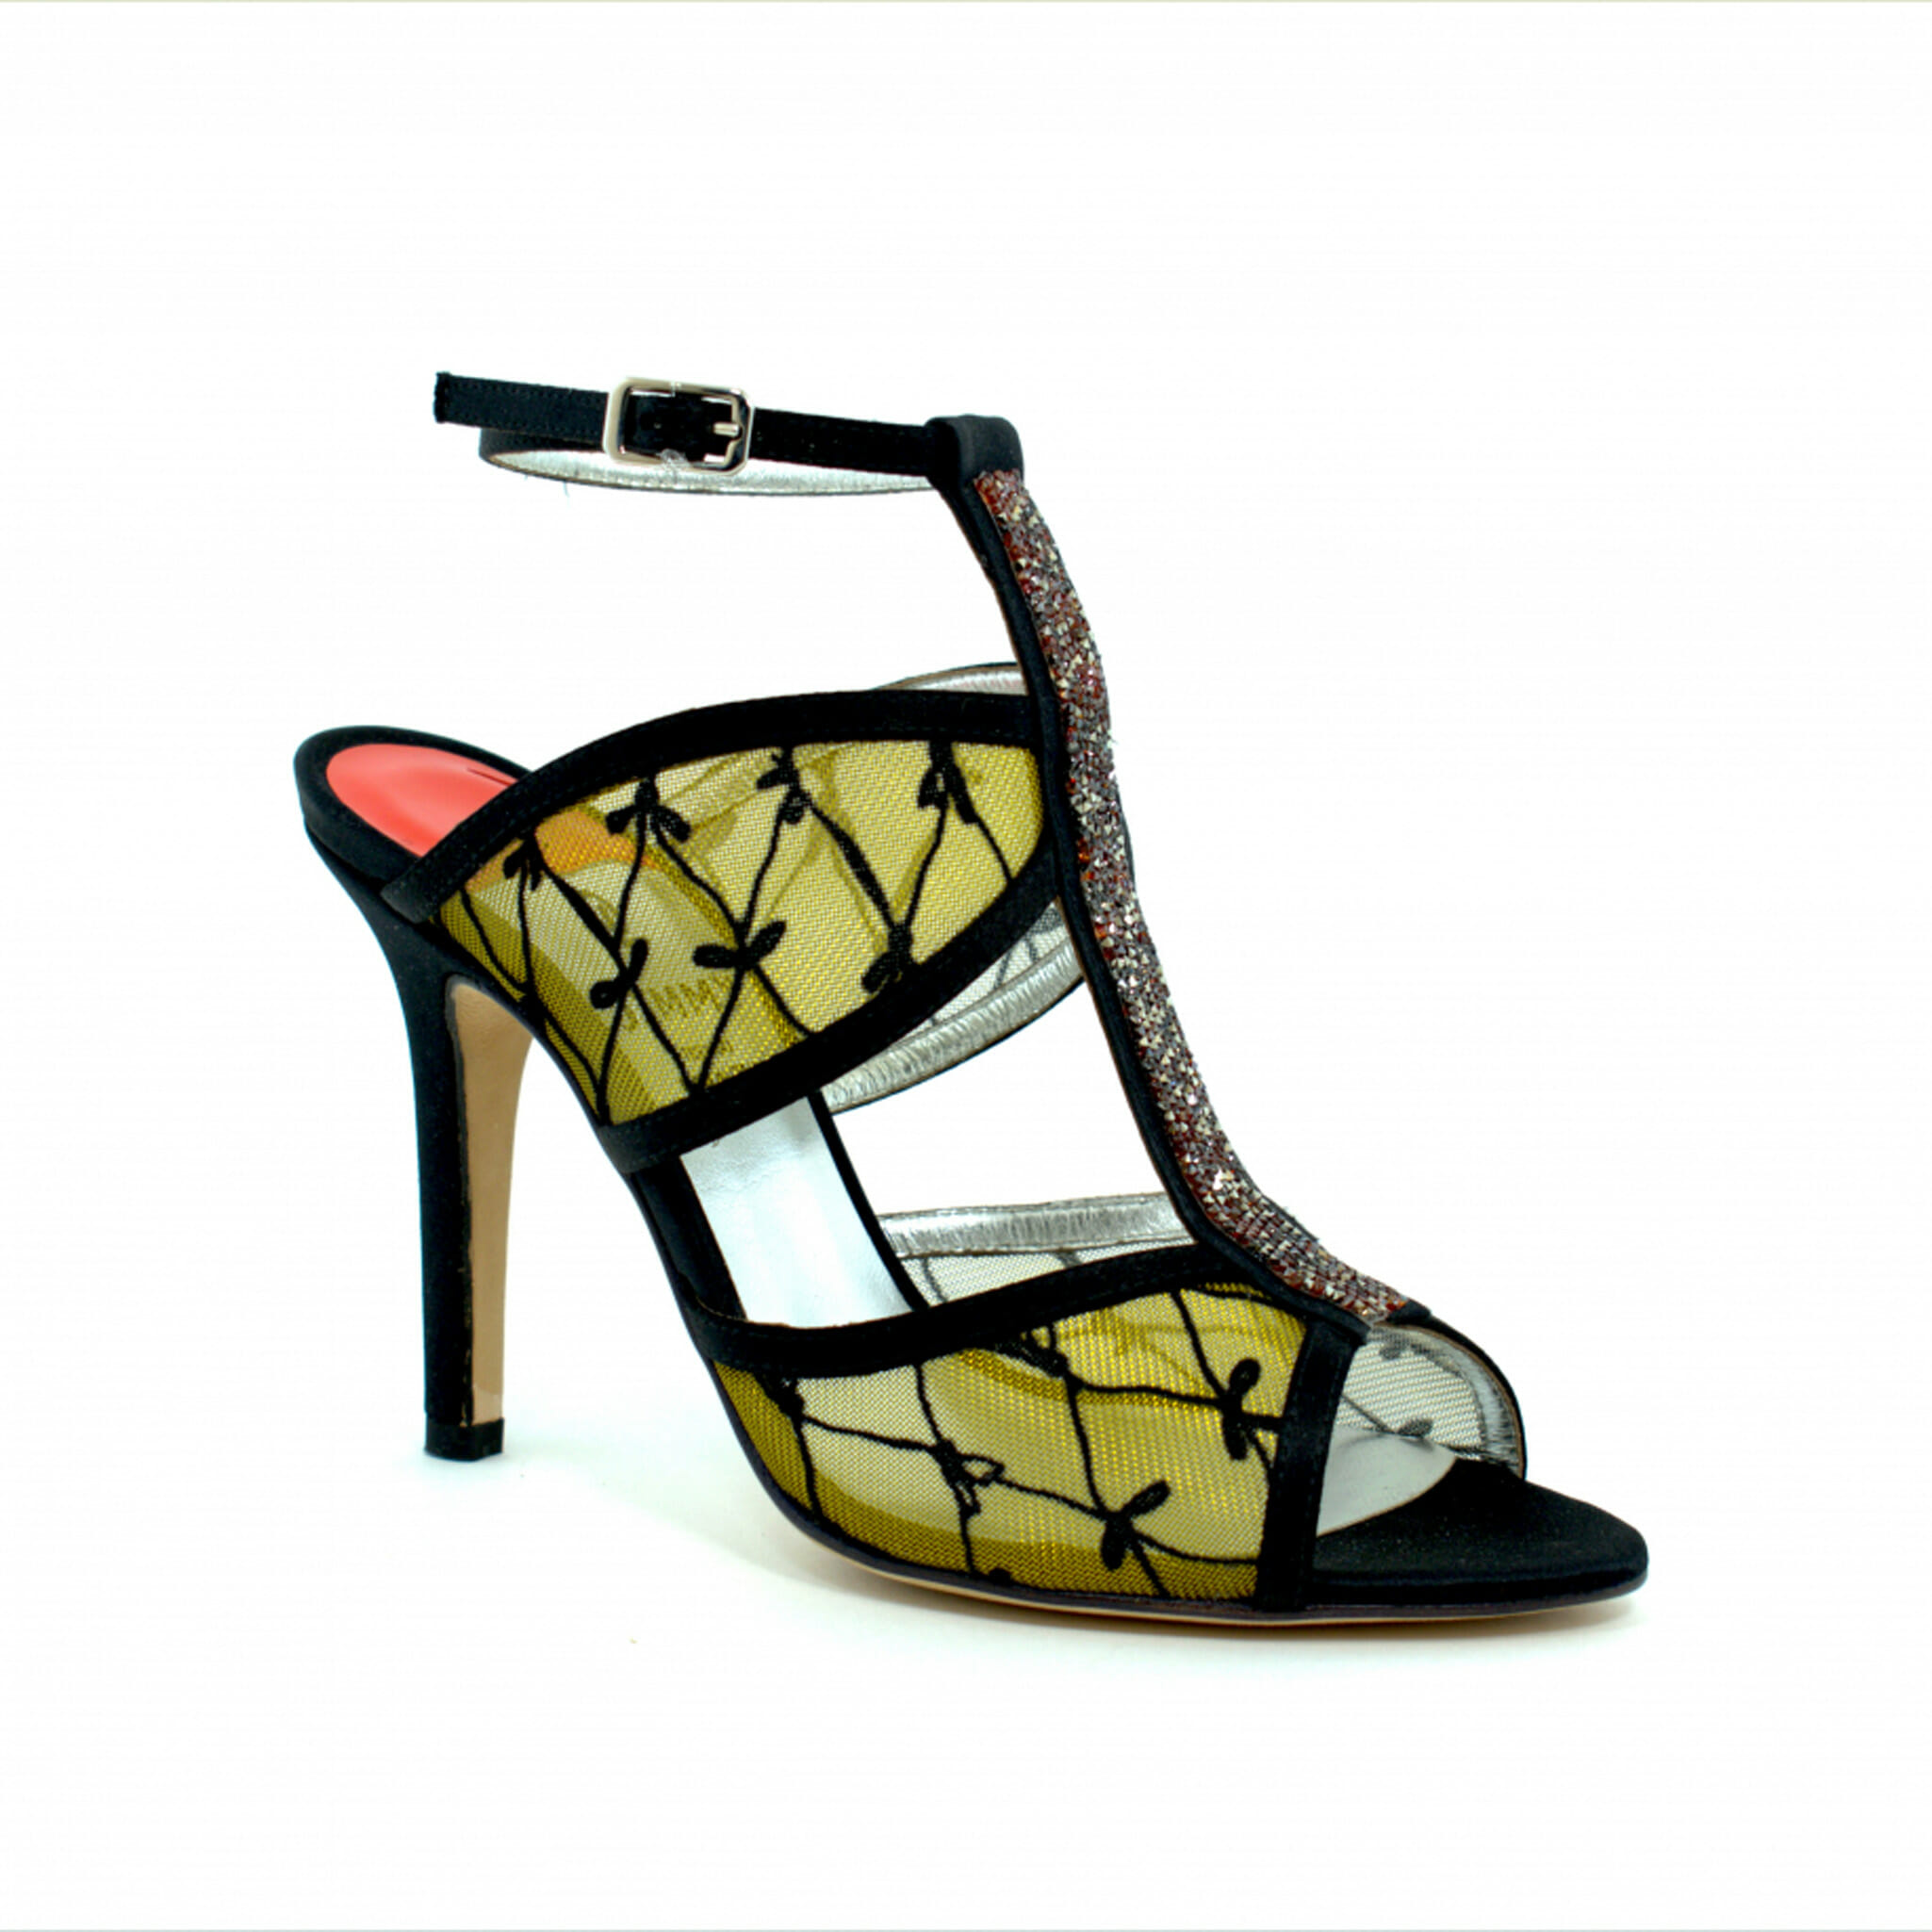 OL JIMMY Shoes - Adriana S Sandals Shoes - The Elegant You Store